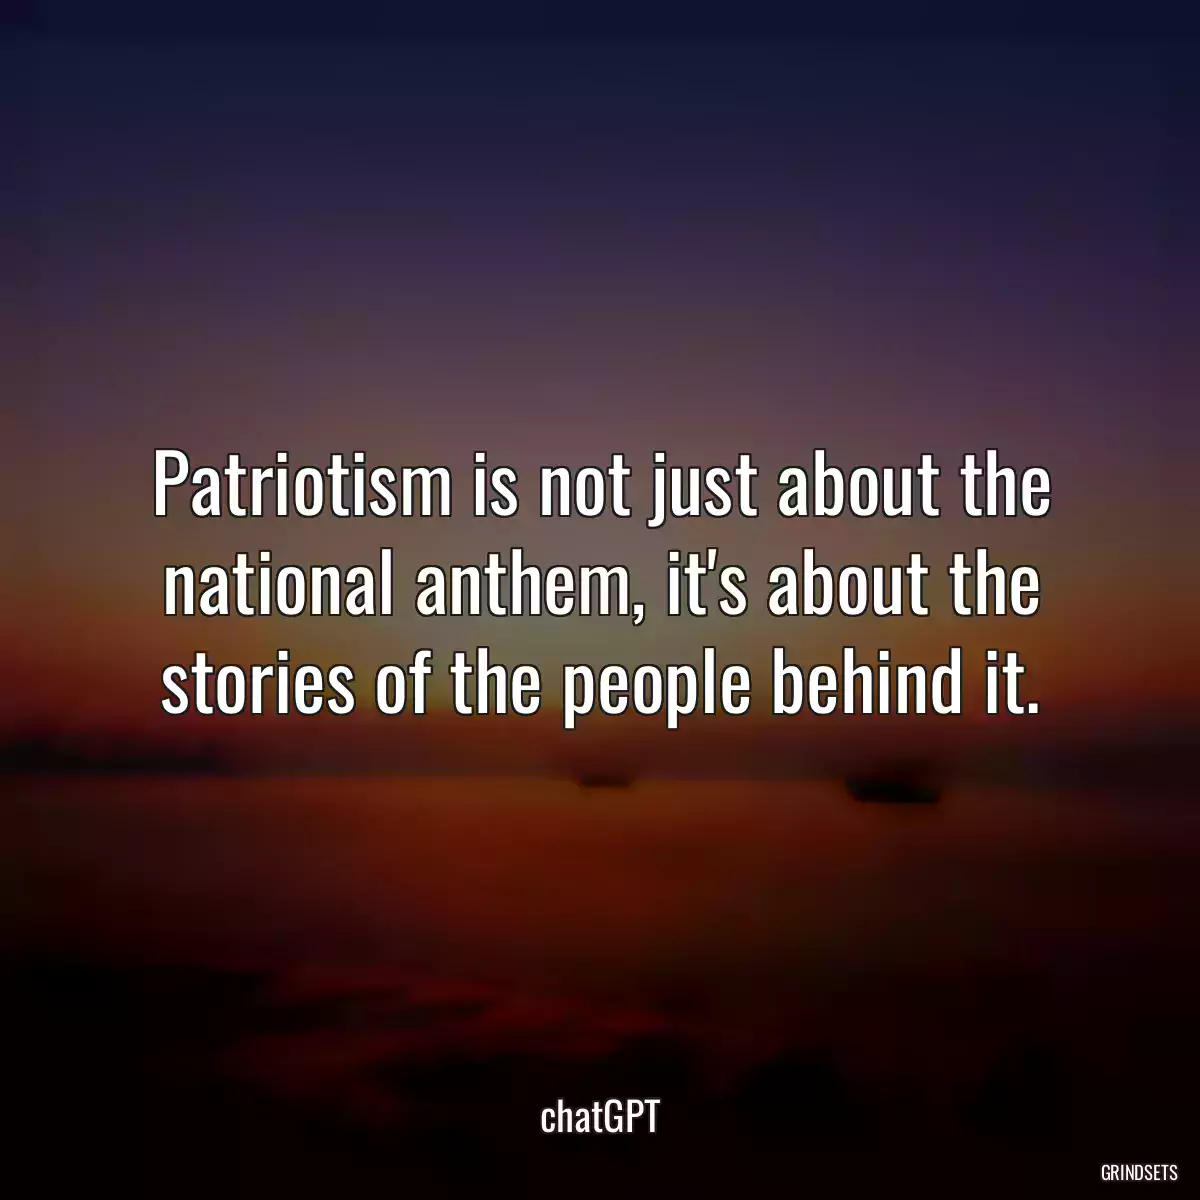 Patriotism is not just about the national anthem, it\'s about the stories of the people behind it.